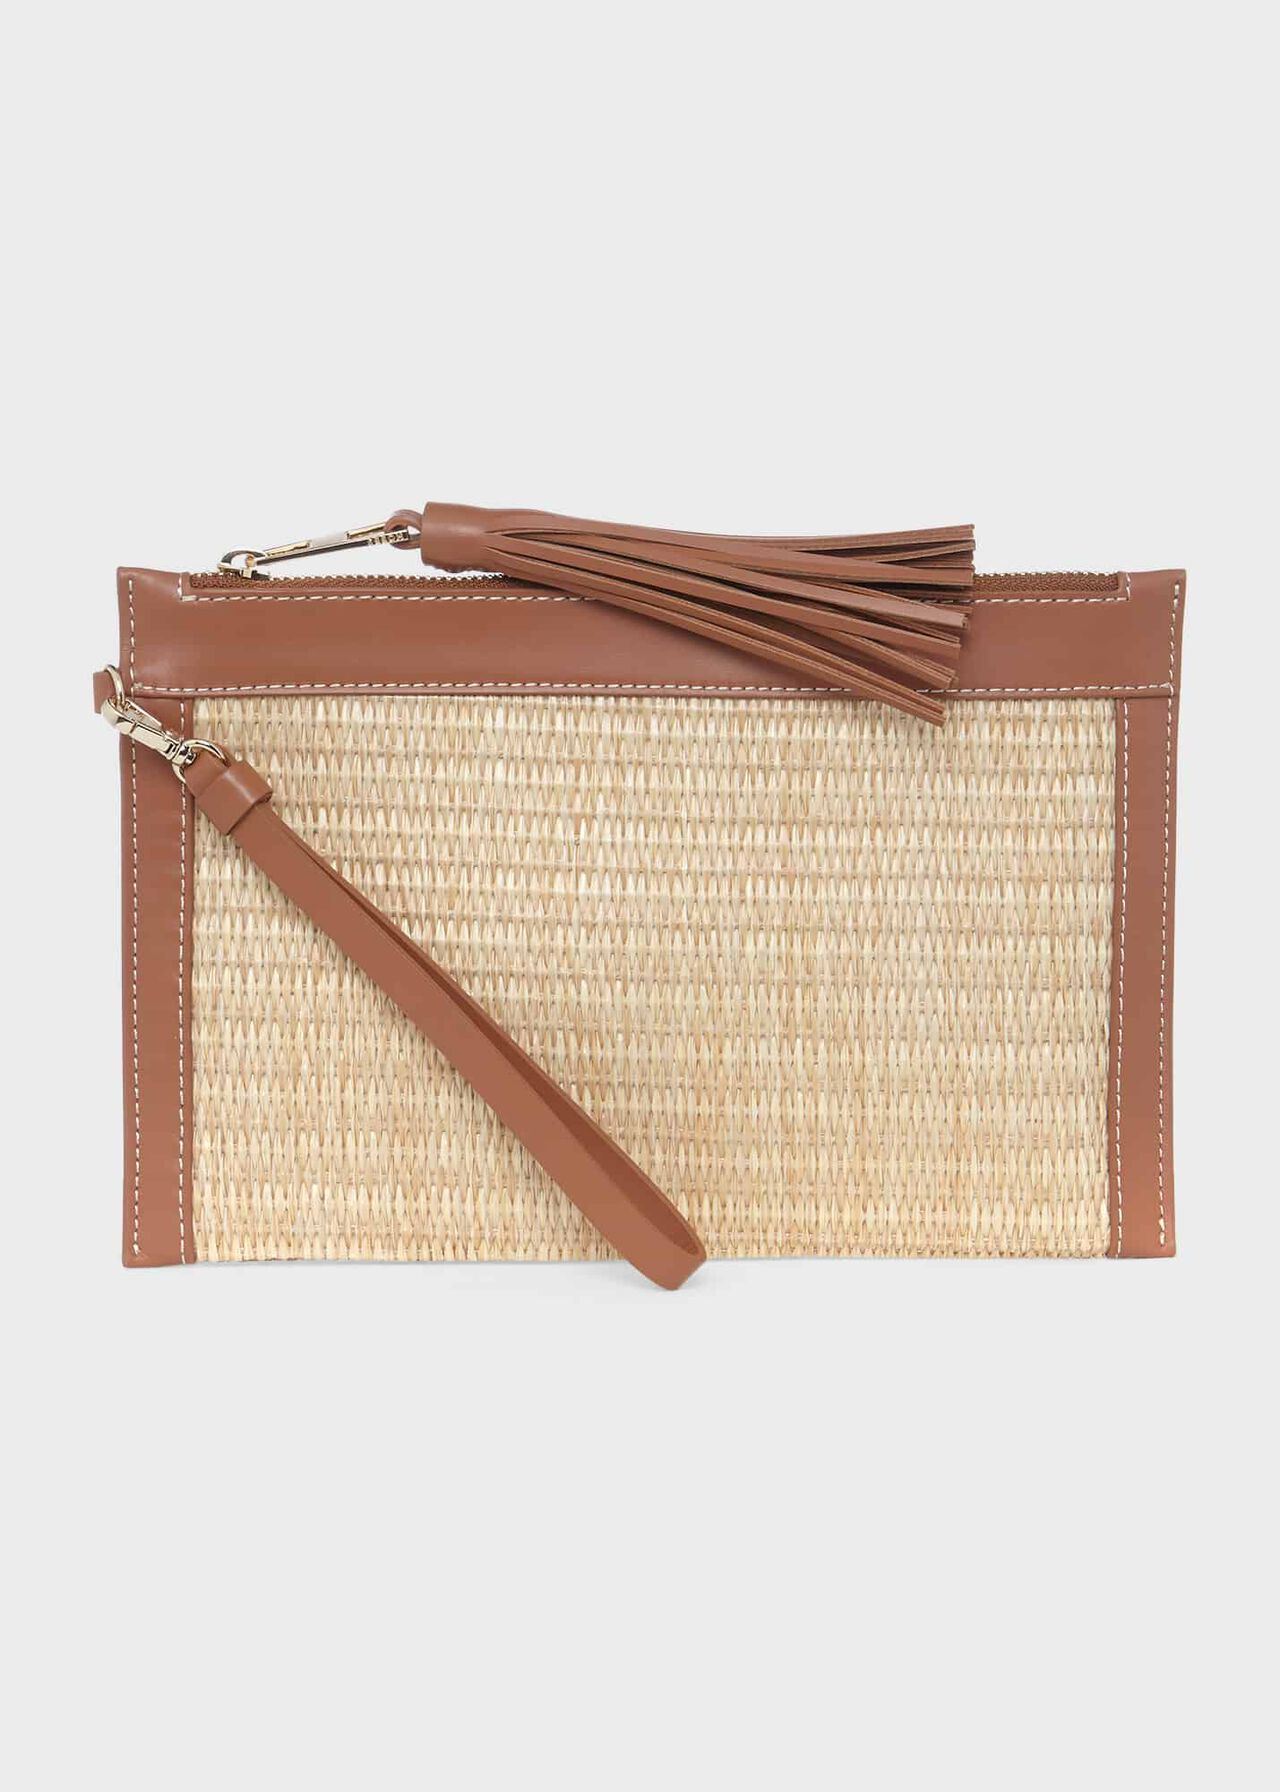 How to Style a Straw Clutch Handbag with Any Outfit